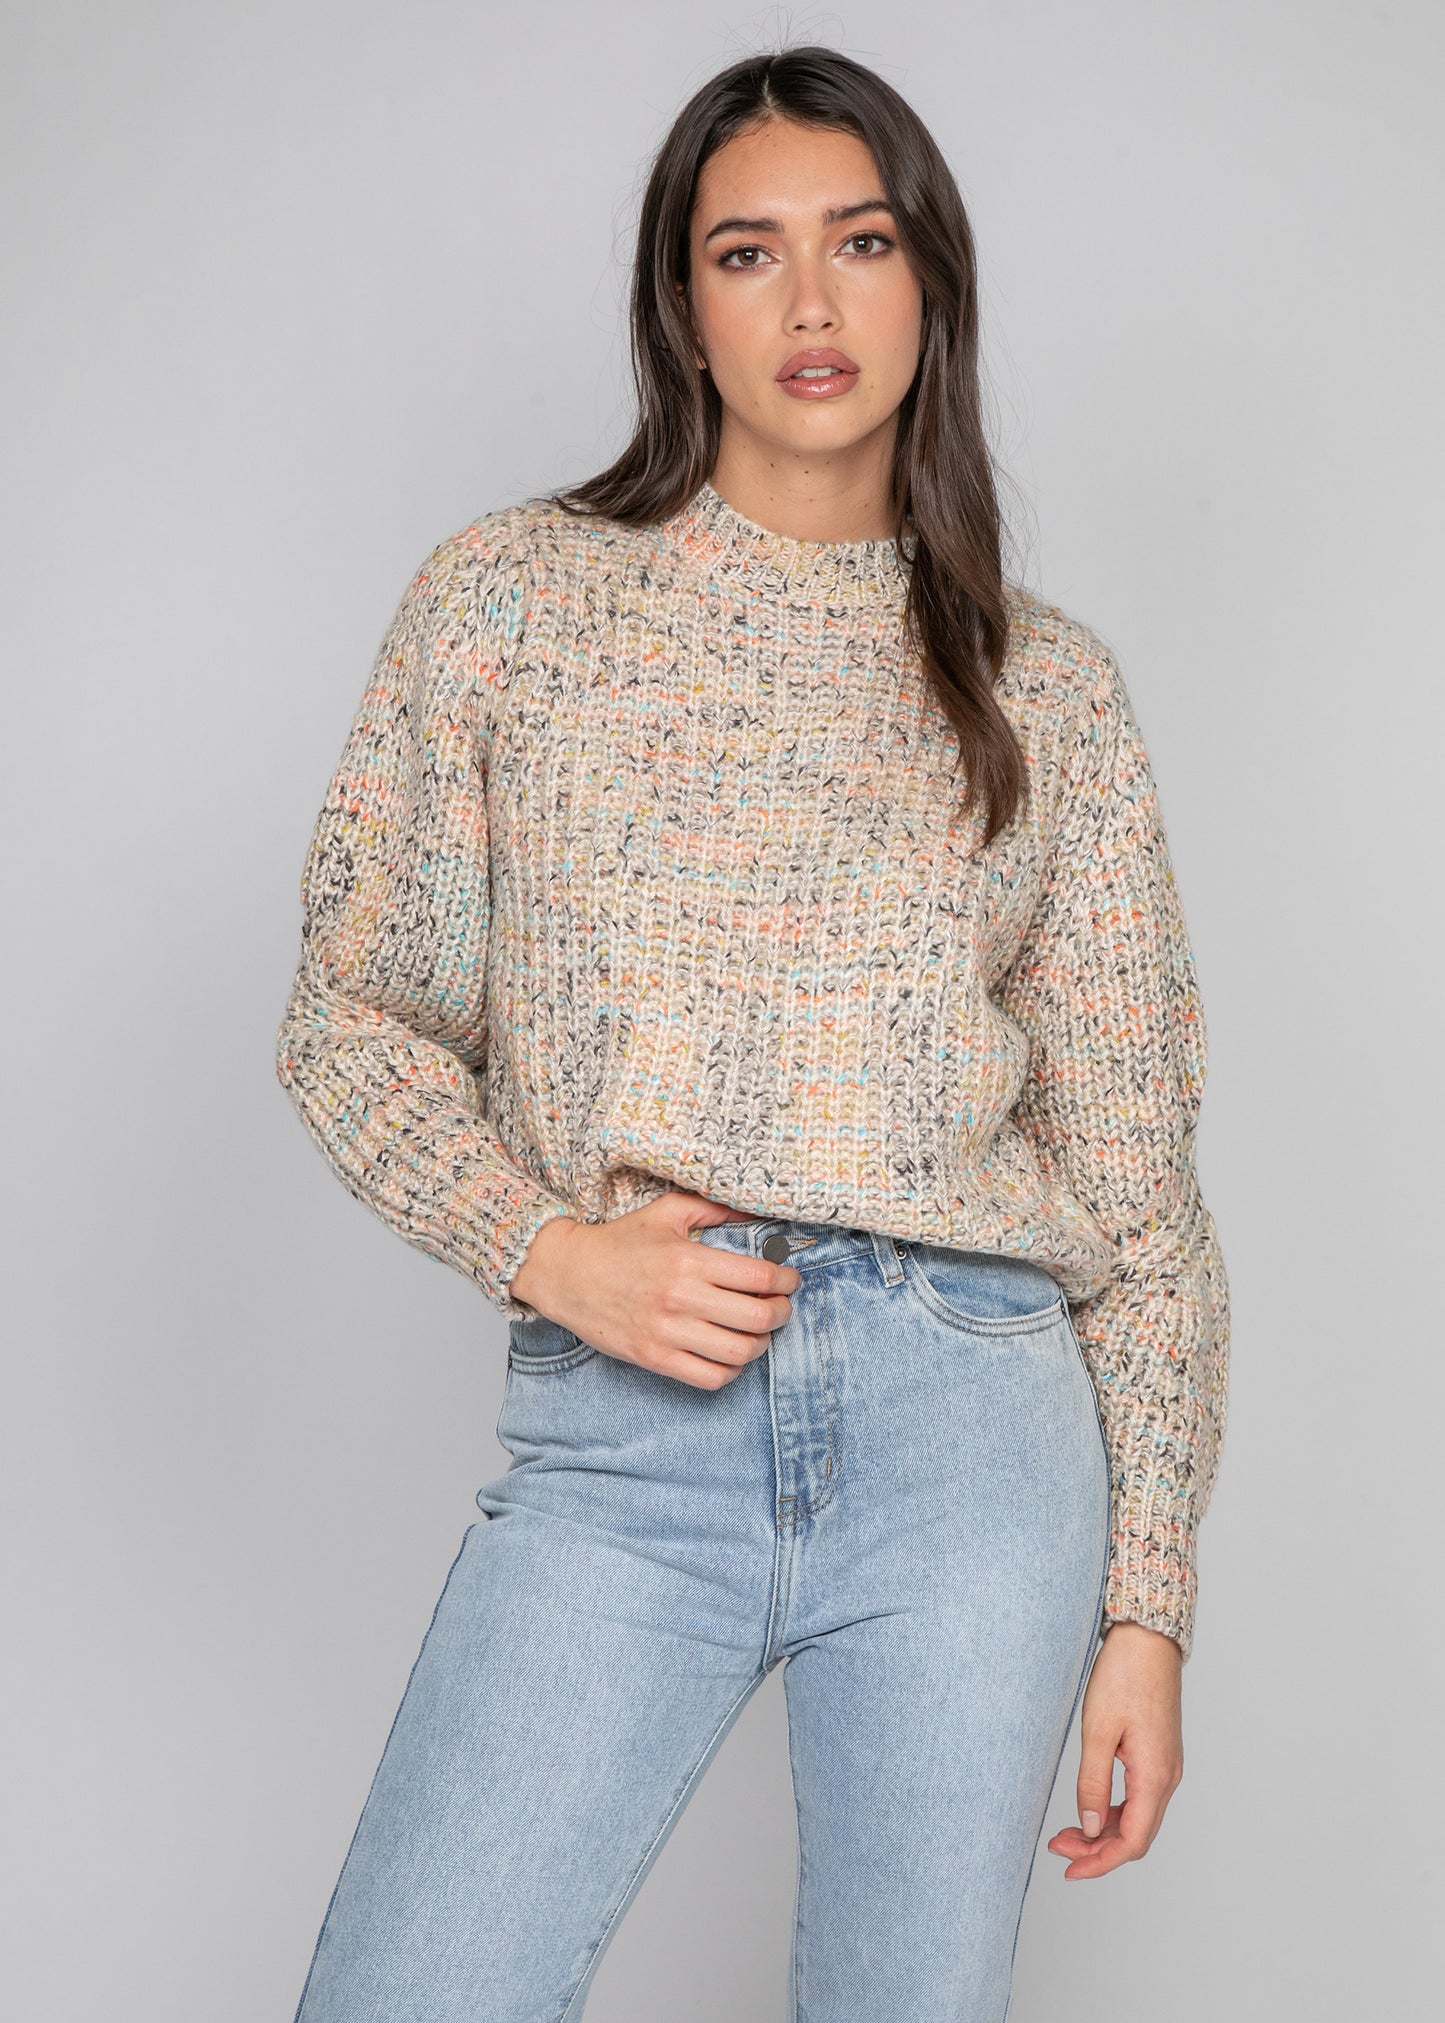 Chunky multicoloured knit jumper